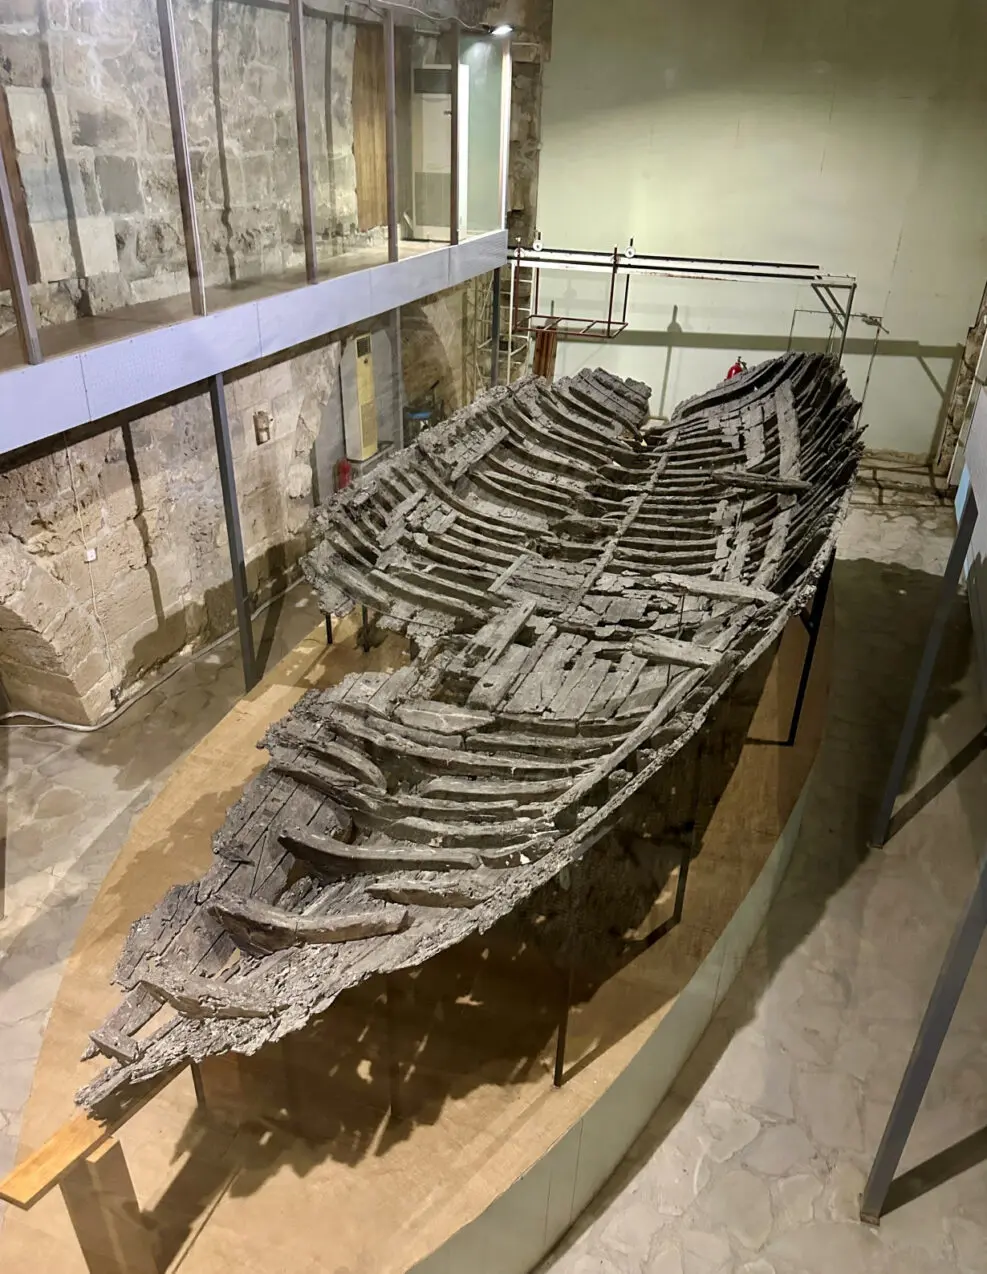 The remains of the ancient Kyrenia ship that sank off the coast of Cyprus are seen in a museum, in Cyprus